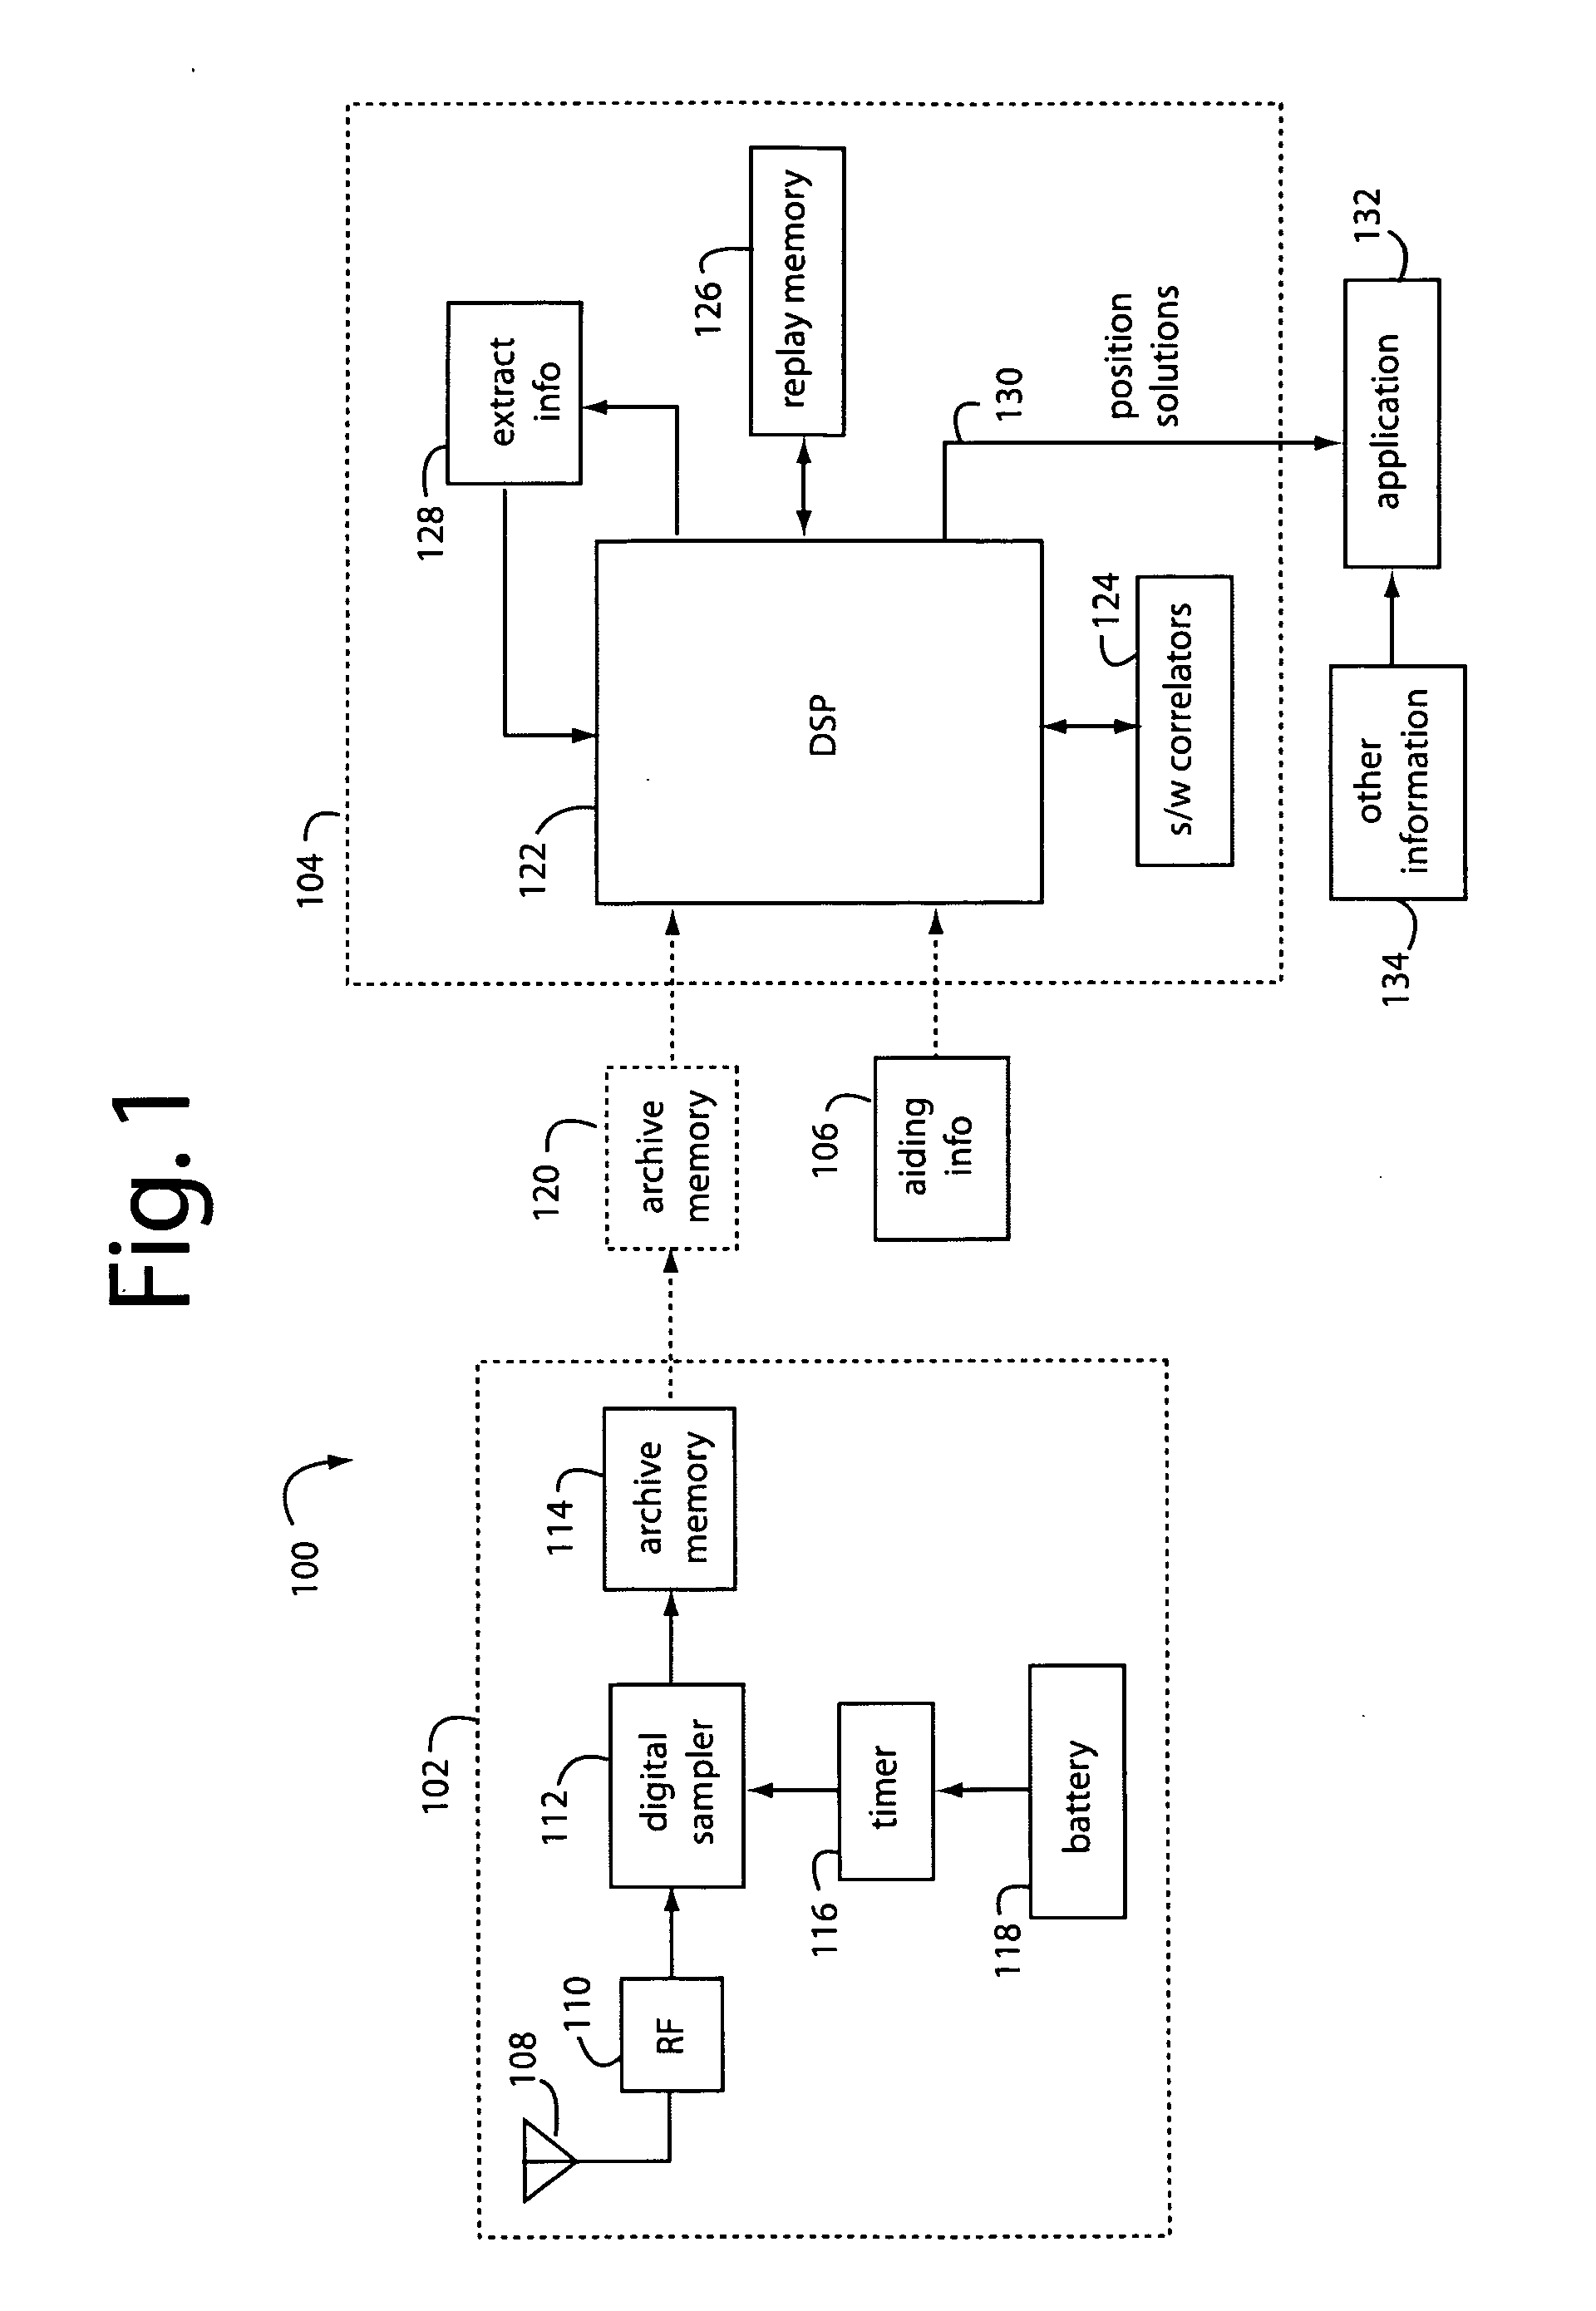 Navigation data acquisition and signal post-processing